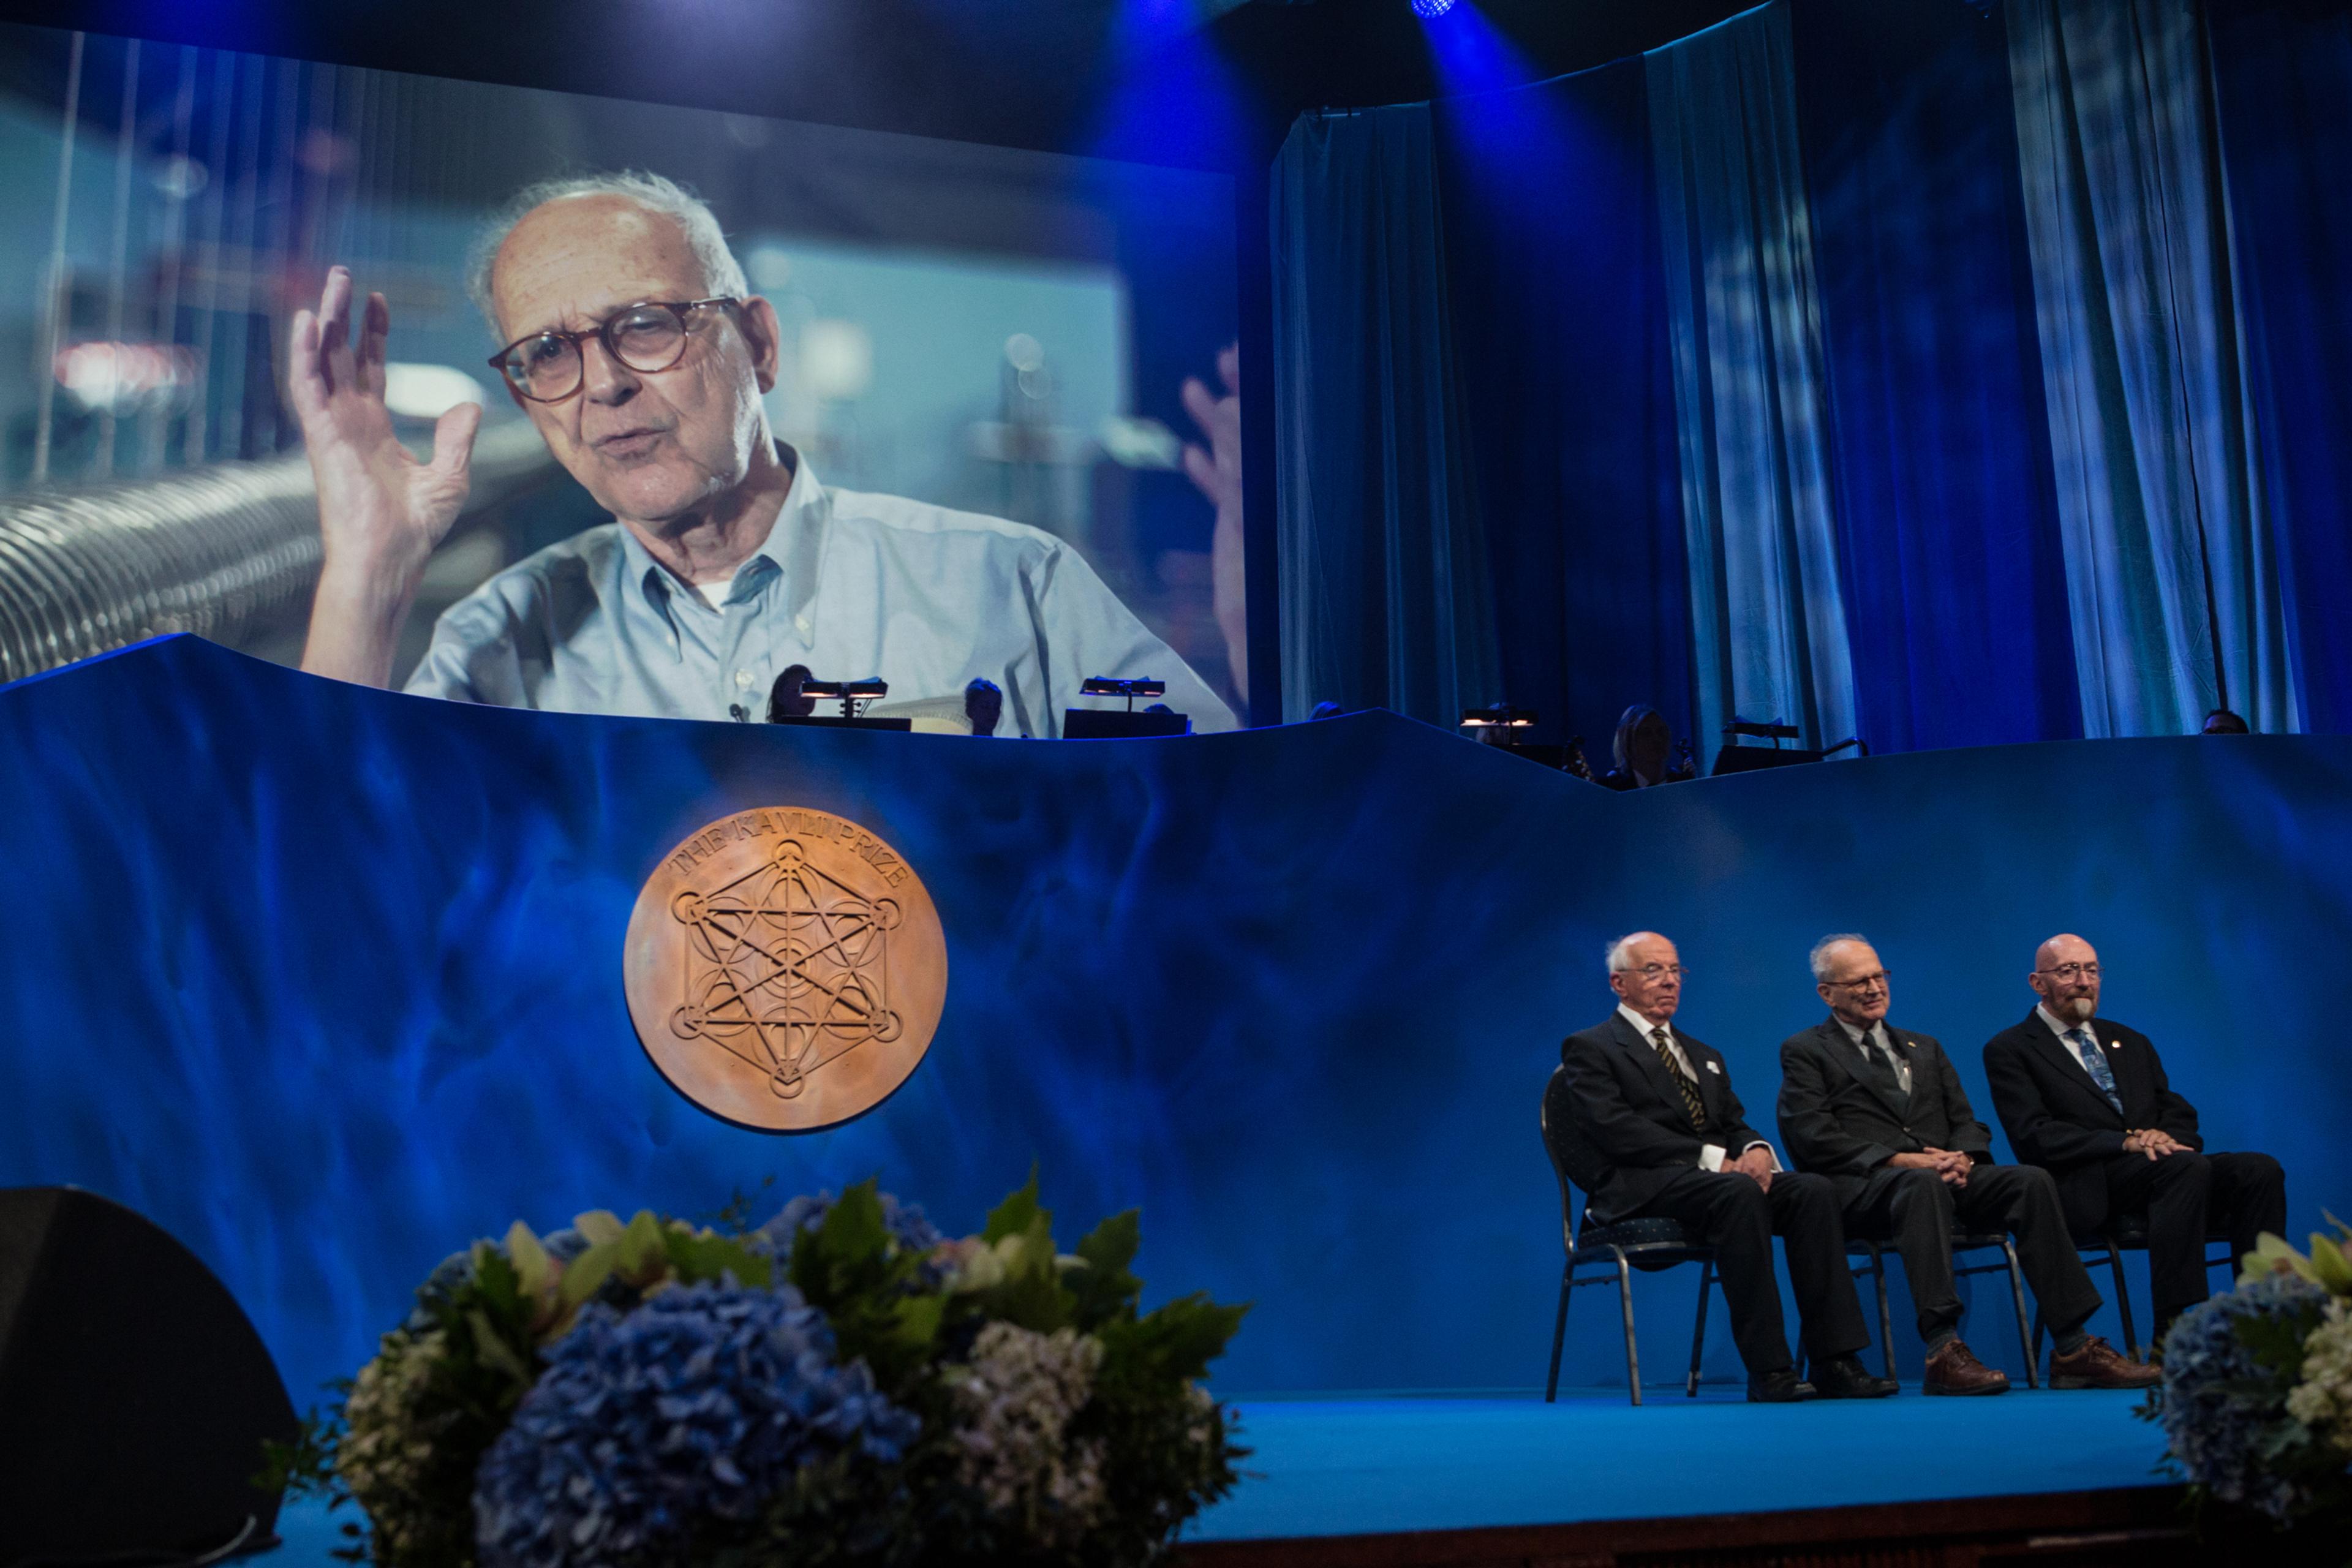 The three astrophysics laureates on stage at the ceremony in Oslo; from left Ronald W.P. Drever's representative, Rainer Weiss and Kip S. Thorne